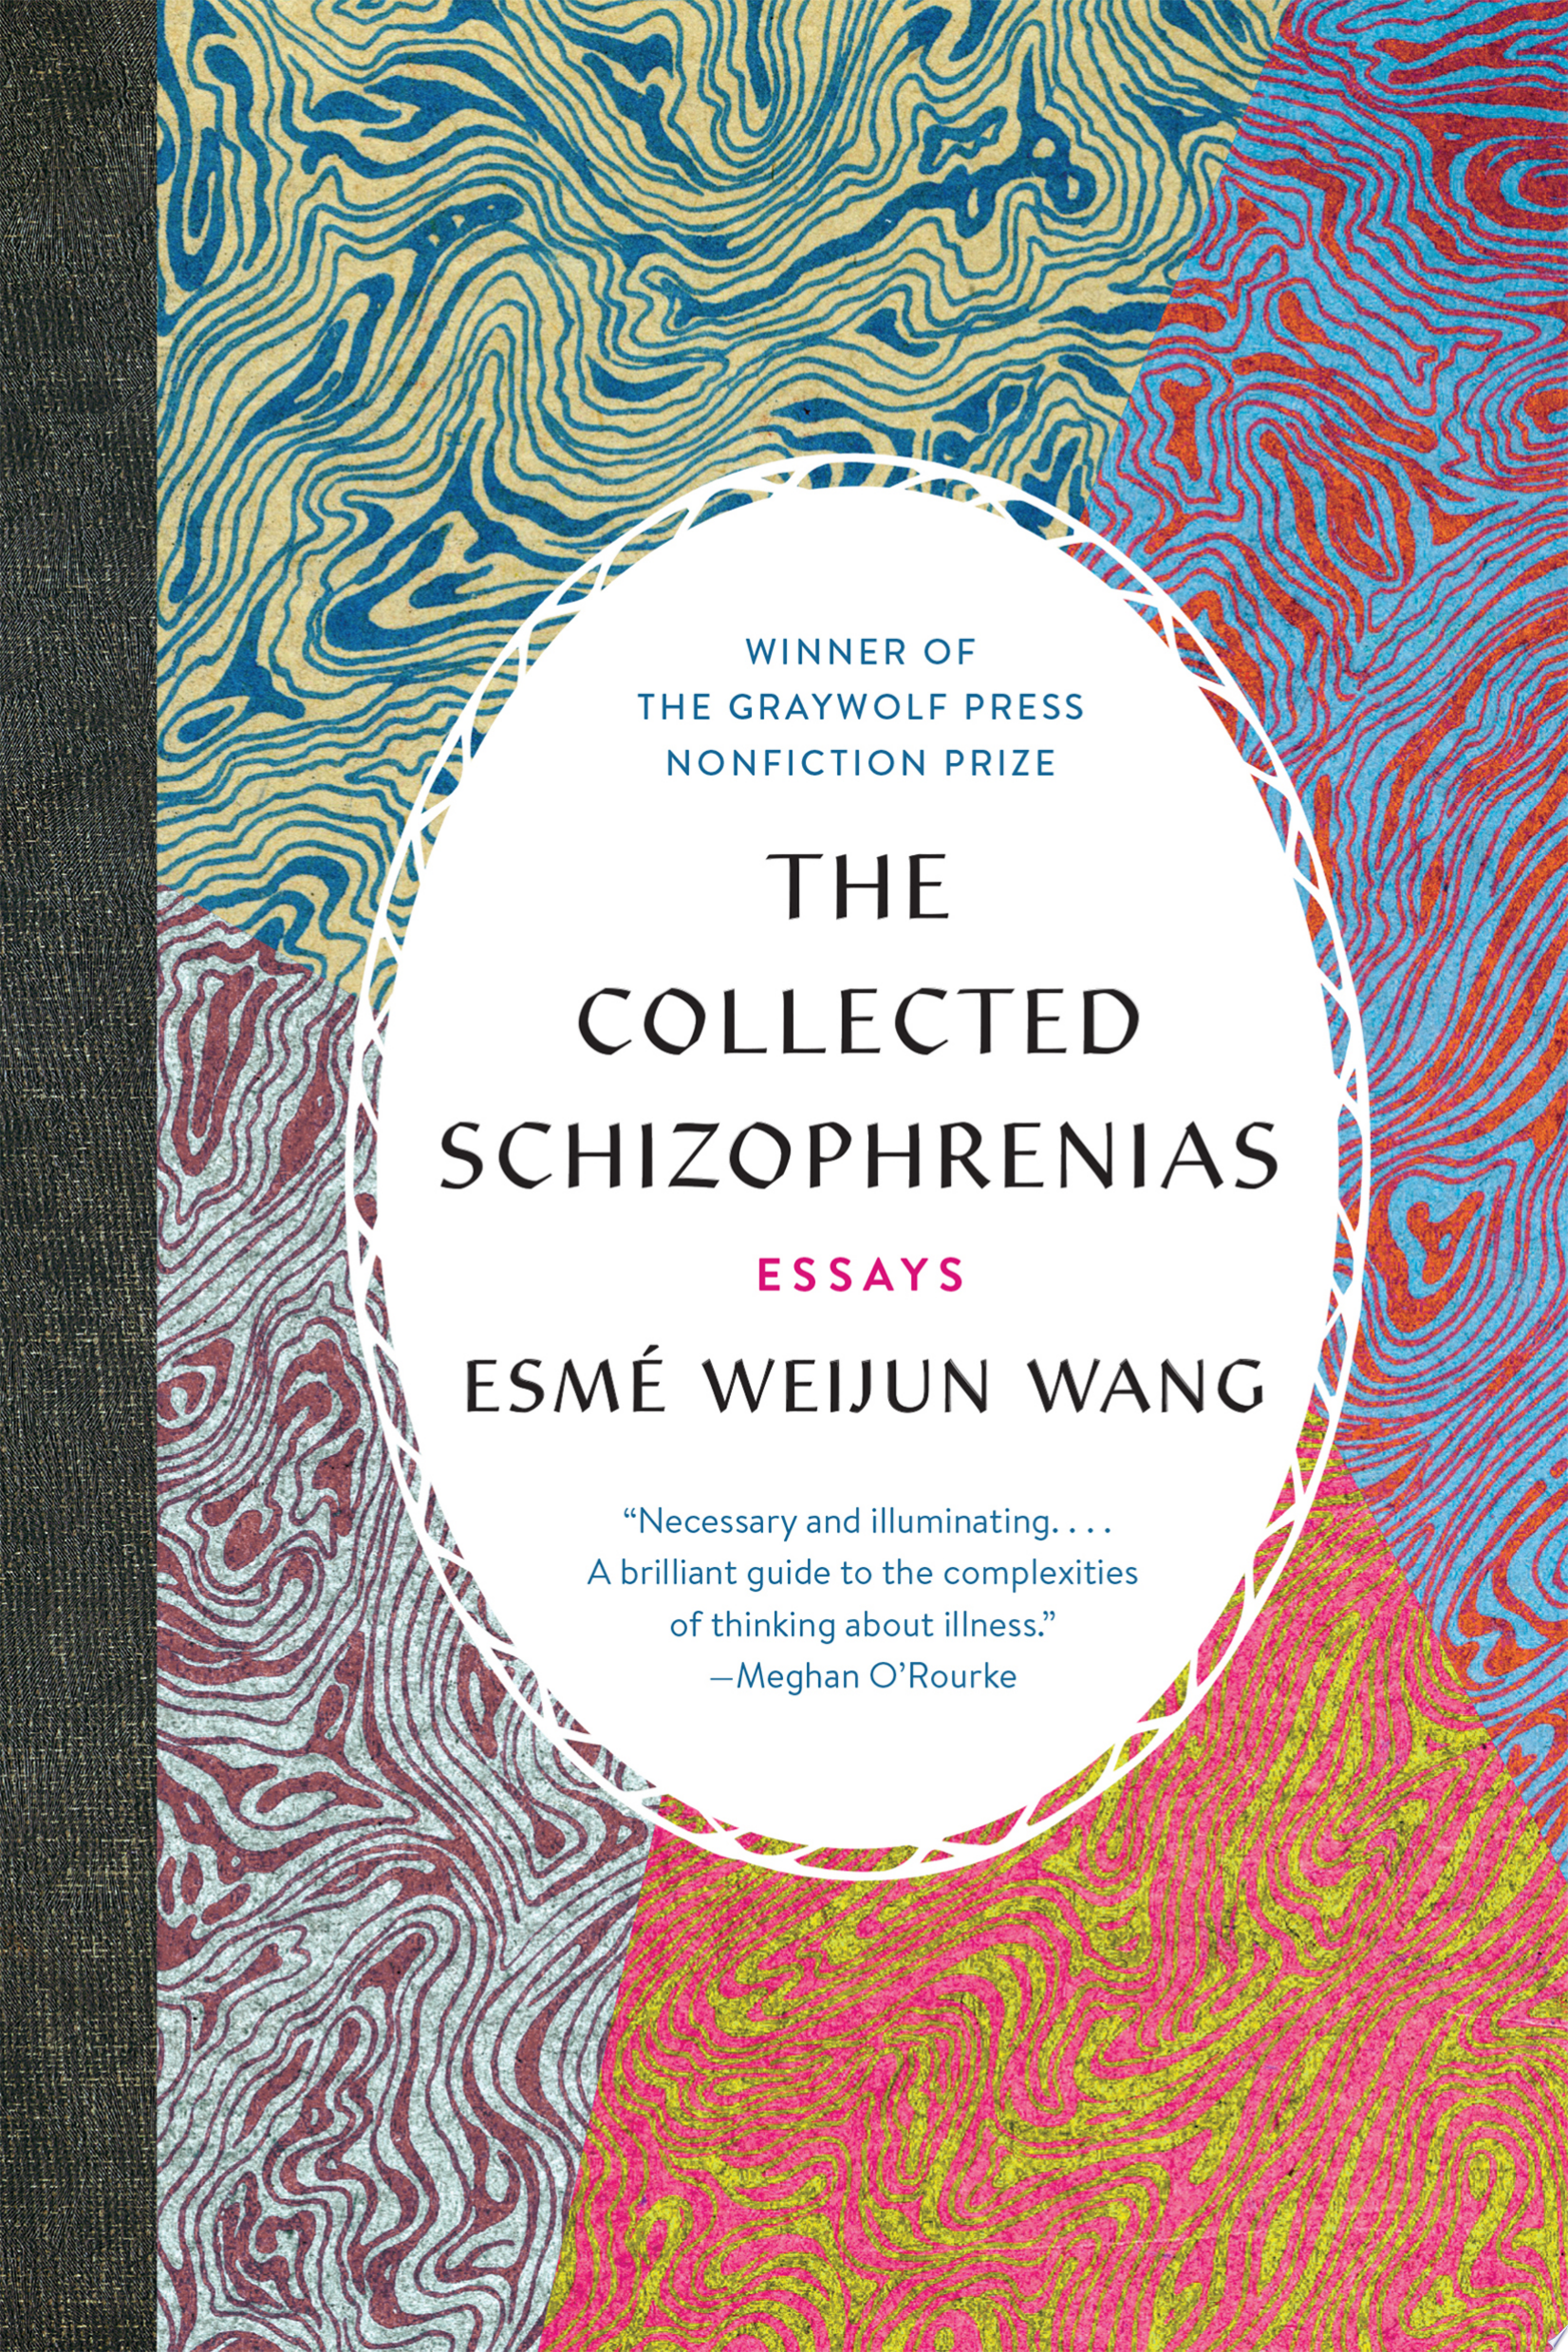 Image for "The Collected Schizophrenias"